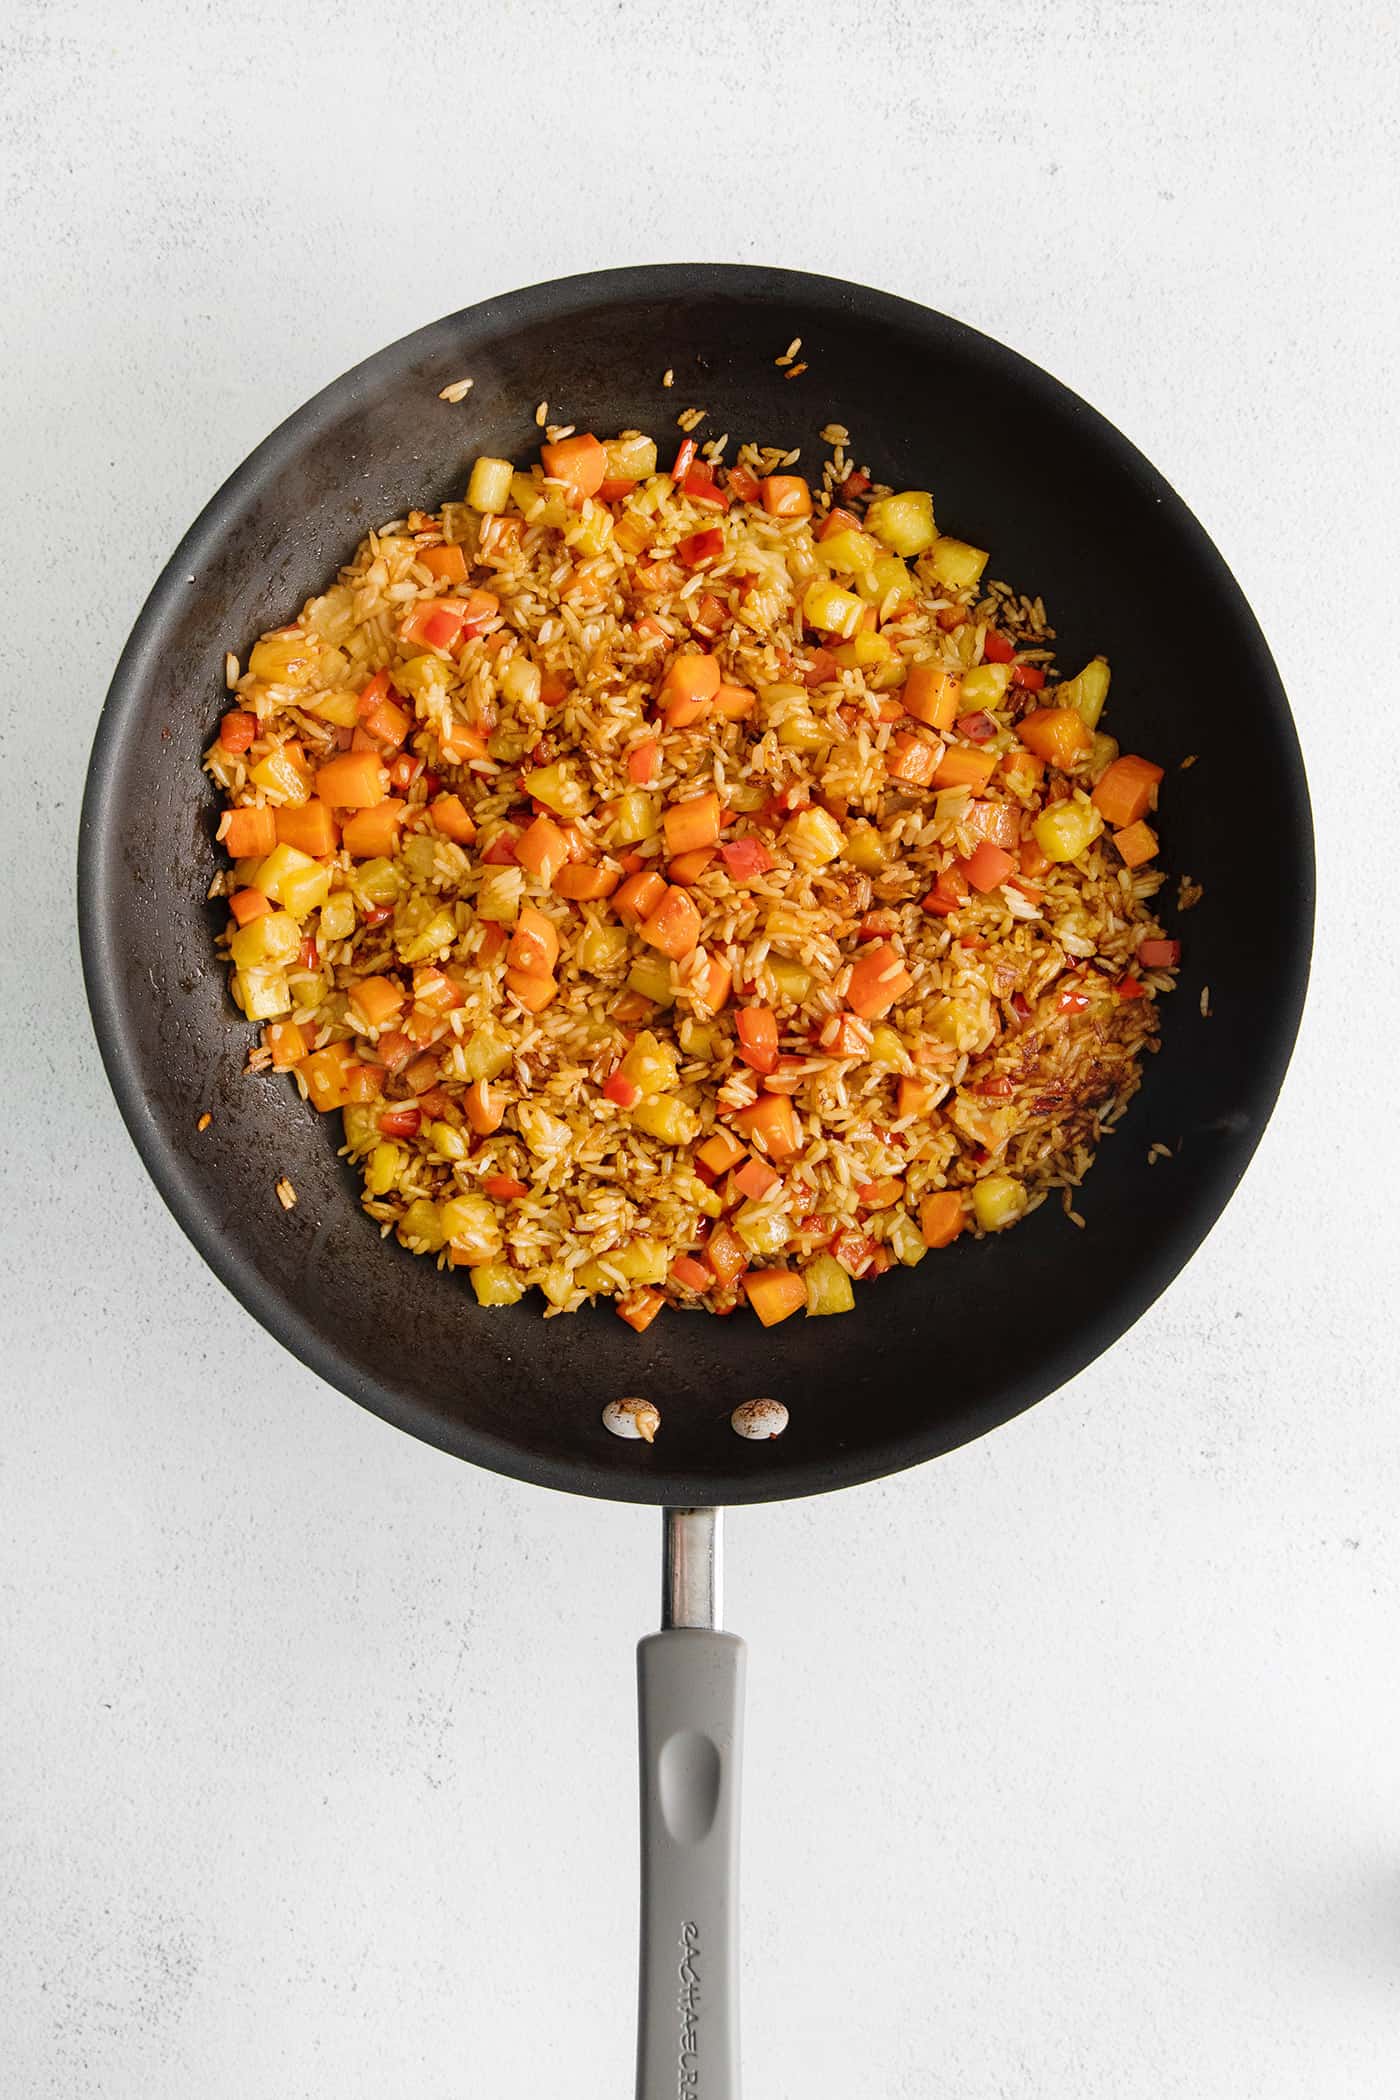 Pineapple, carrots, and bell peppers in a skillet